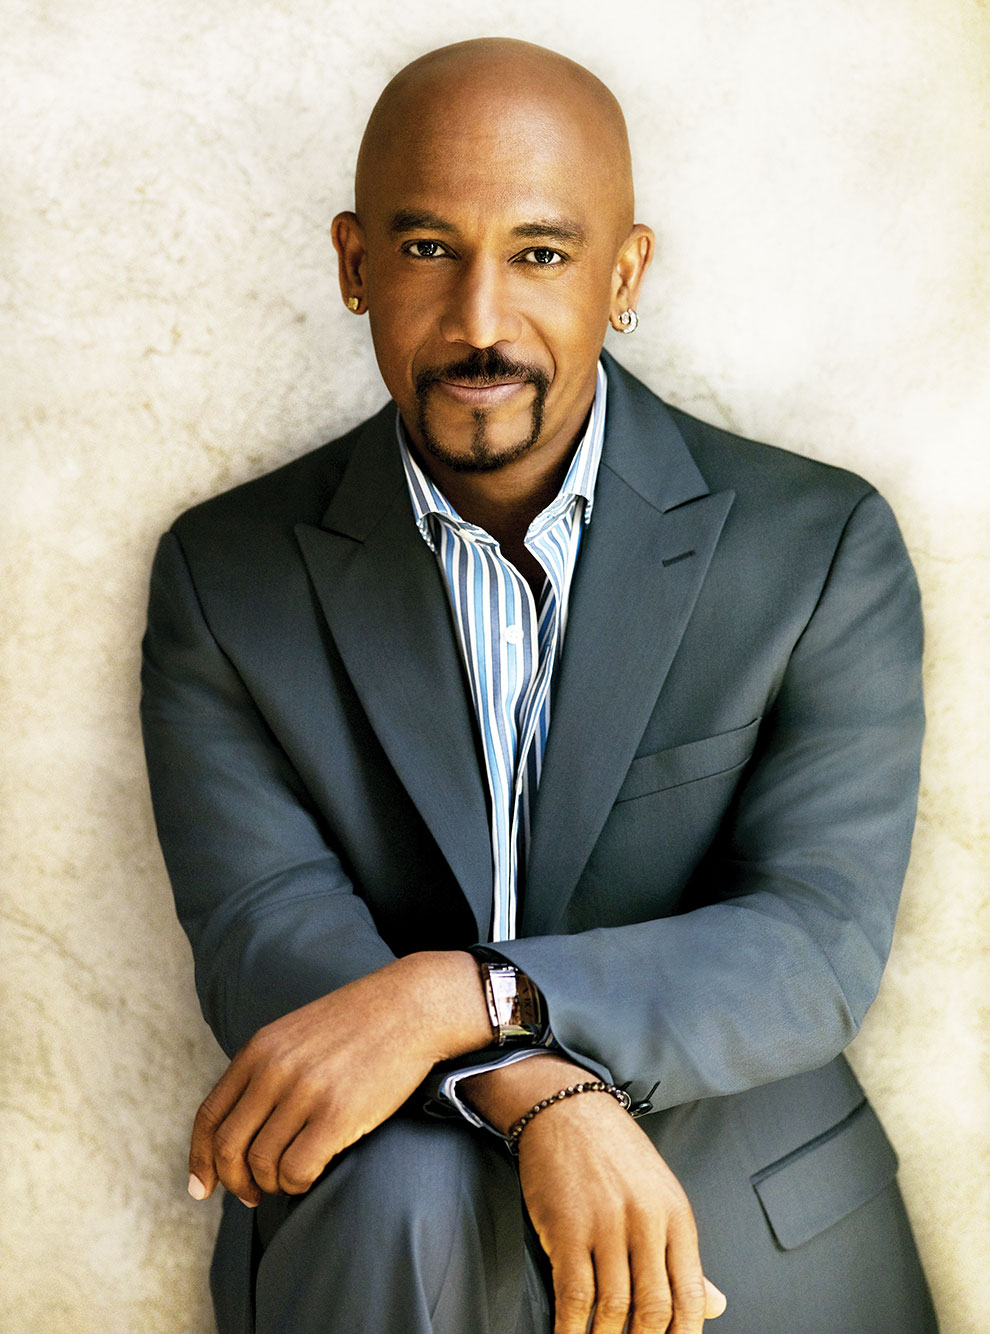 Montel Williams, Emmy Award-winning celebrity and wellness advocate, talks about Activz Coconut Water Powder on National TV April 13th.